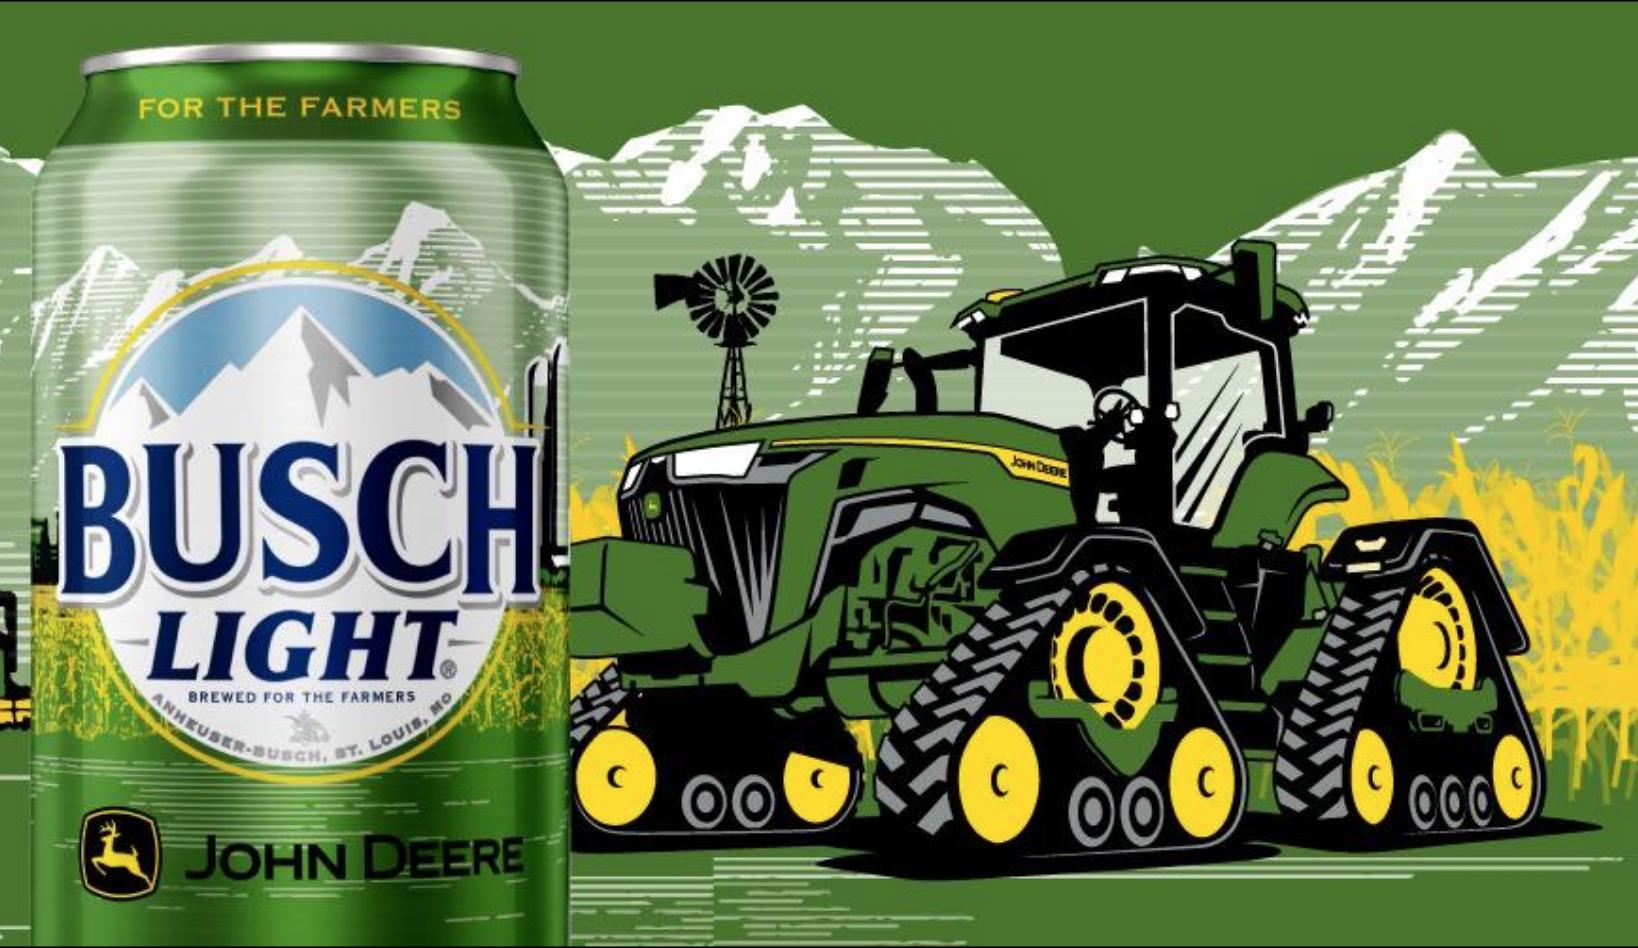 Where to buy Busch Light x John Deere limited edition beer